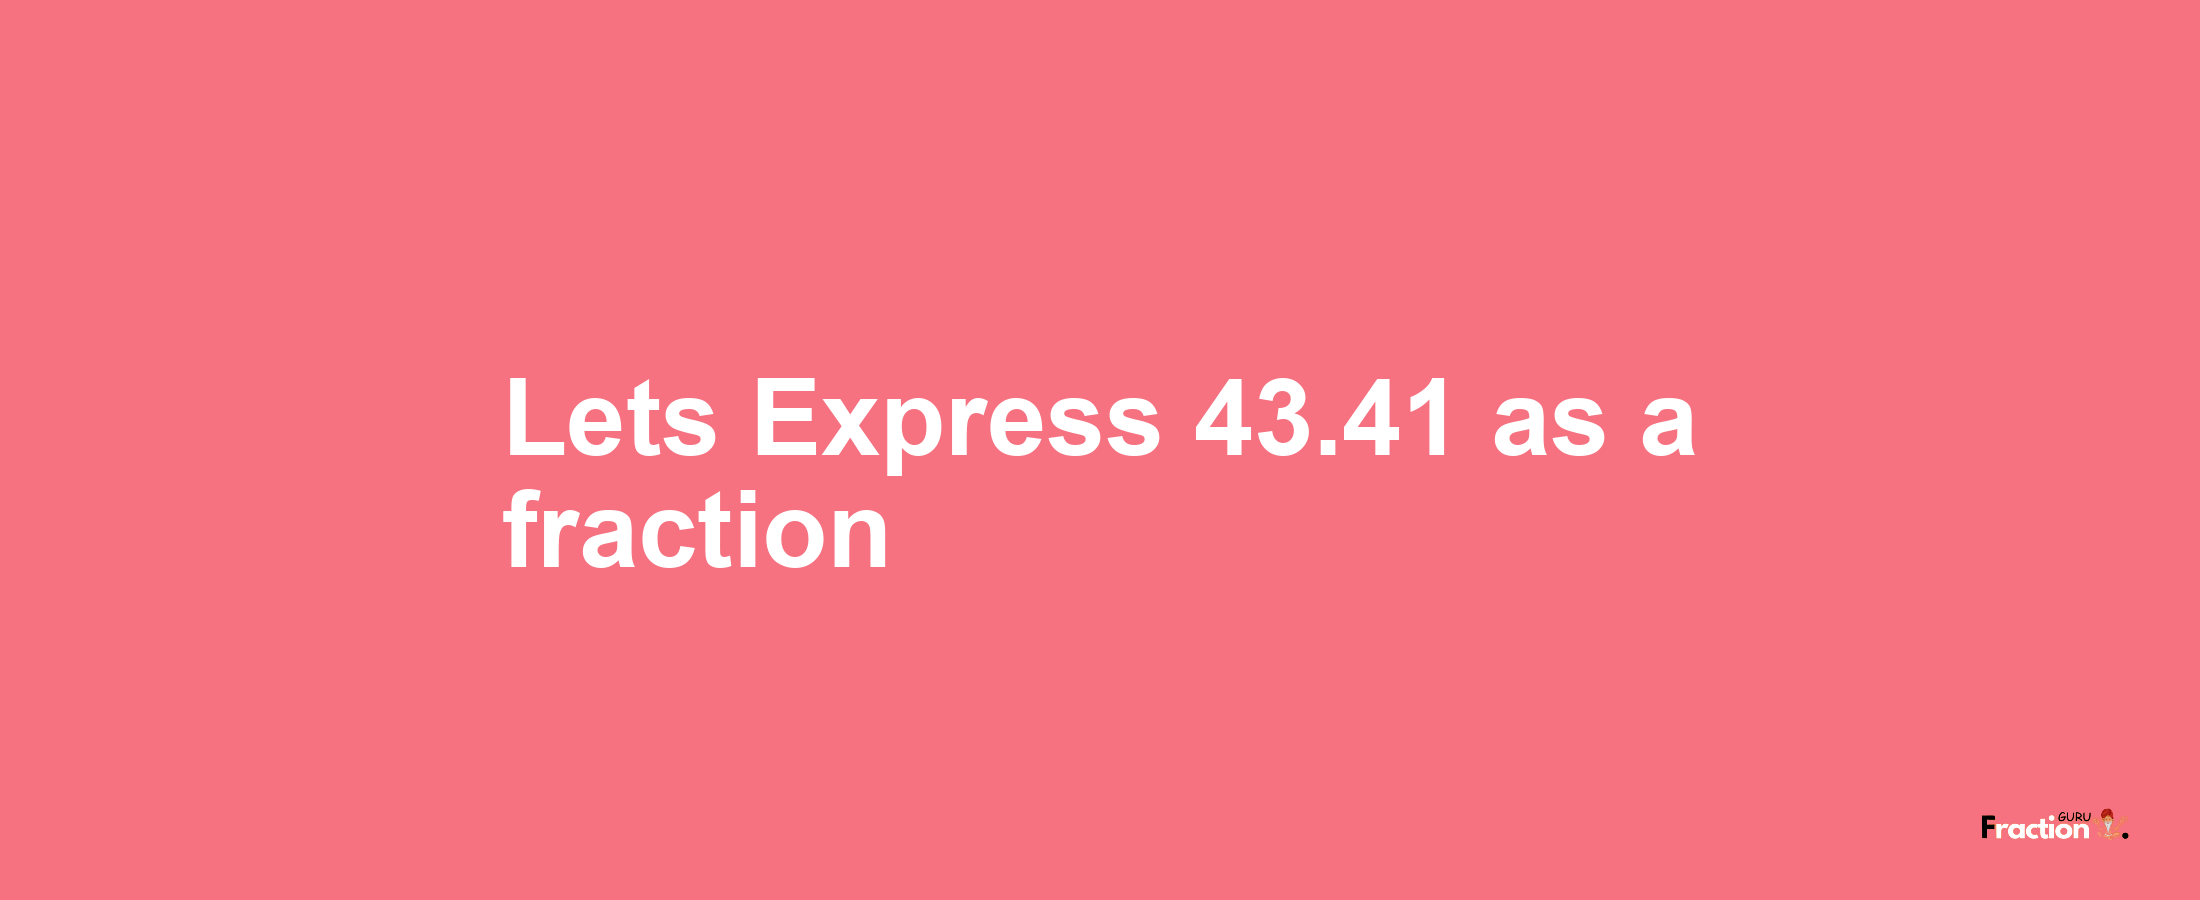 Lets Express 43.41 as afraction